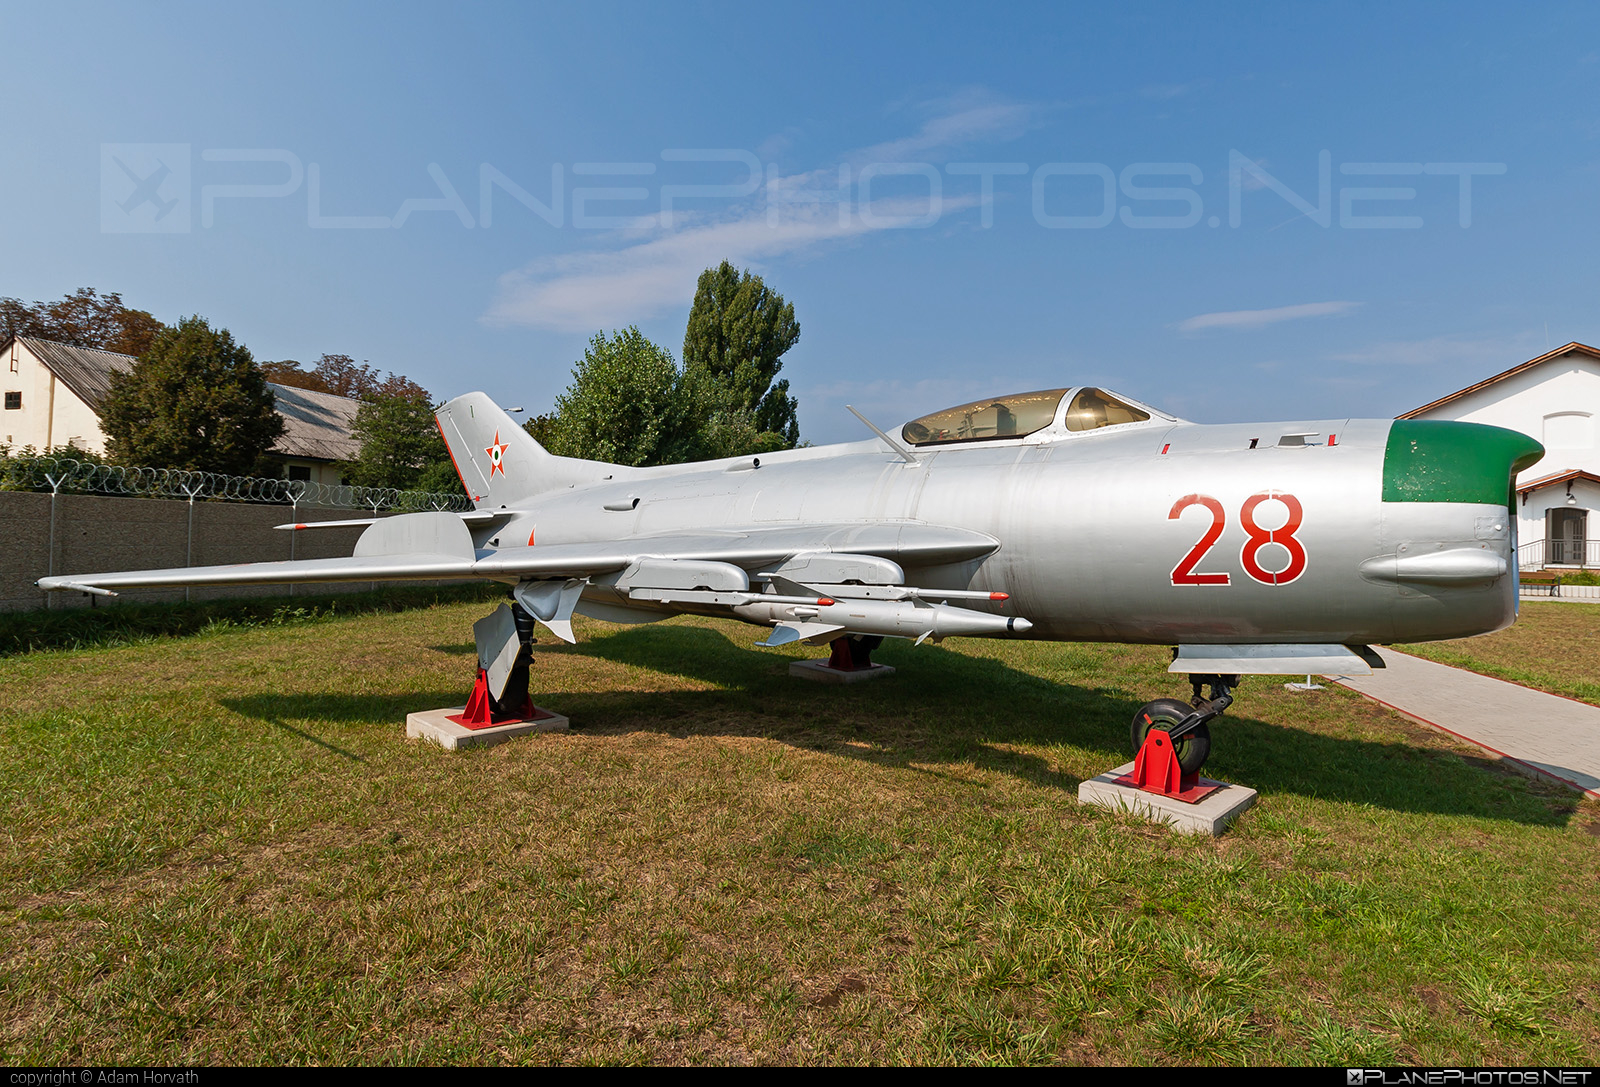 Mikoyan-Gurevich MiG-19PM - 28 operated by Magyar Néphadsereg (Hungarian People's Army) #hungarianpeoplesarmy #magyarnephadsereg #mig #mikoyangurevich